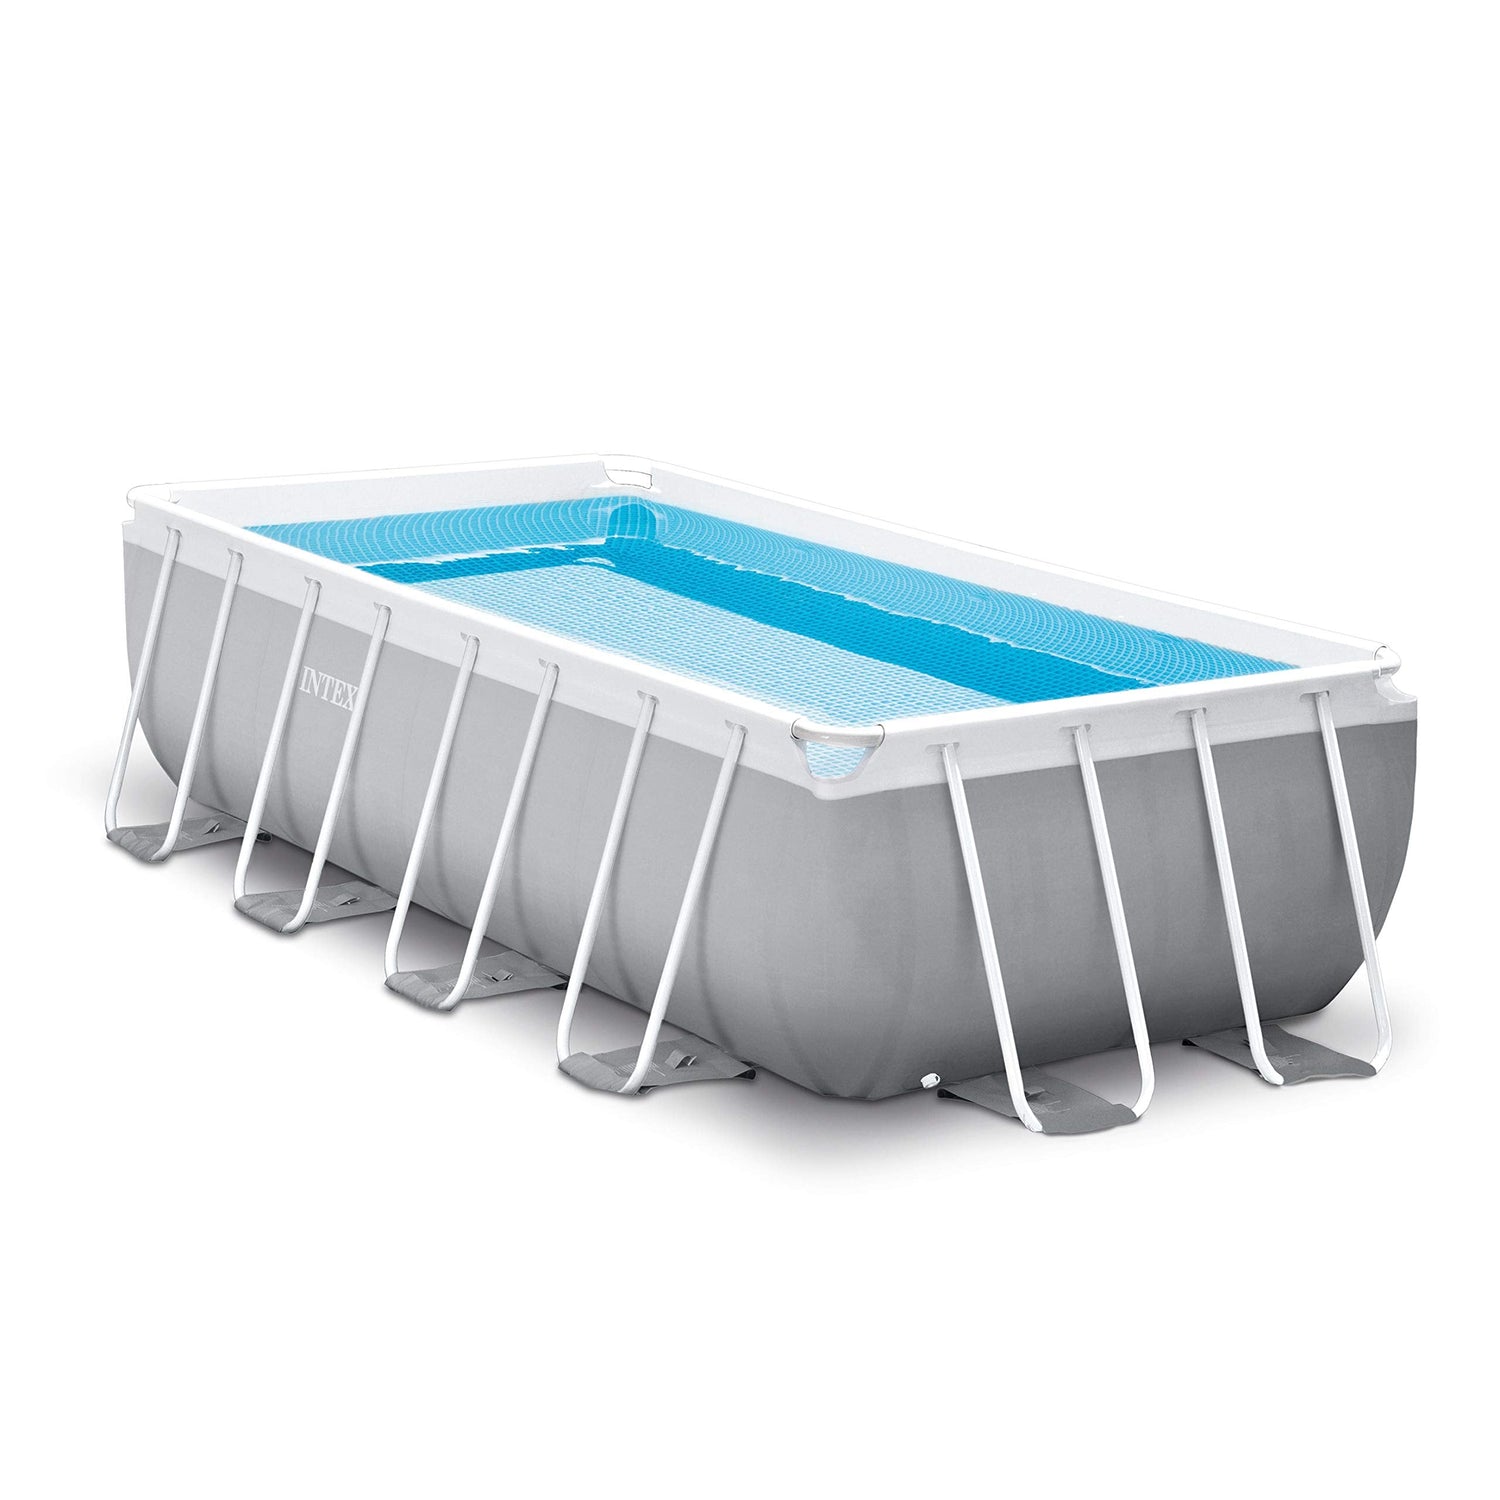 rectangle above ground pool